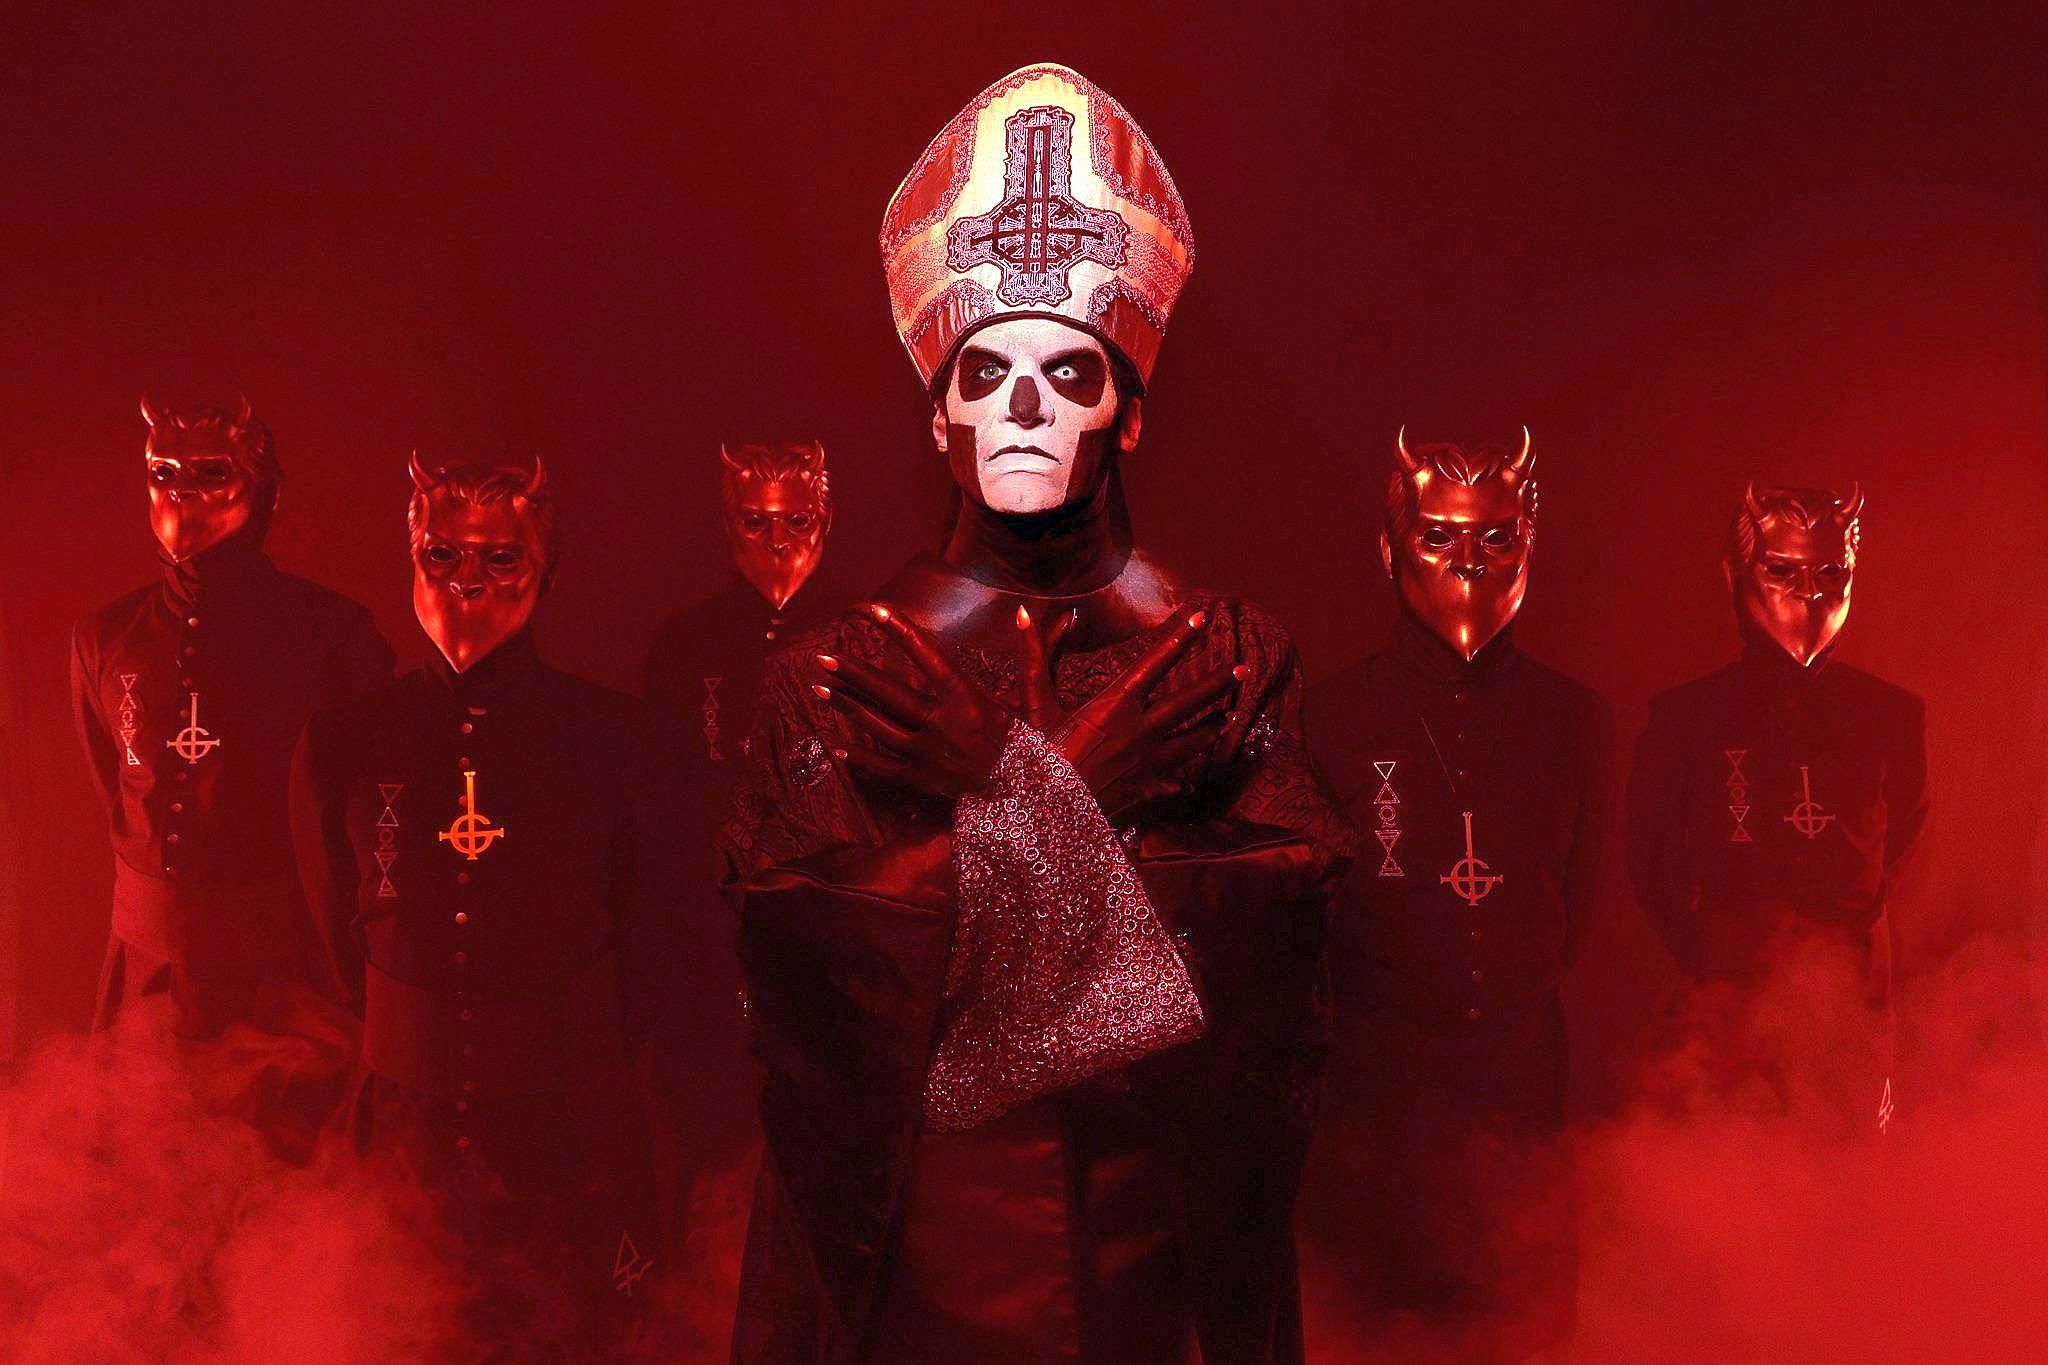 ghost wallpaper free download. Ghost bc, Band ghost, Ghost papa